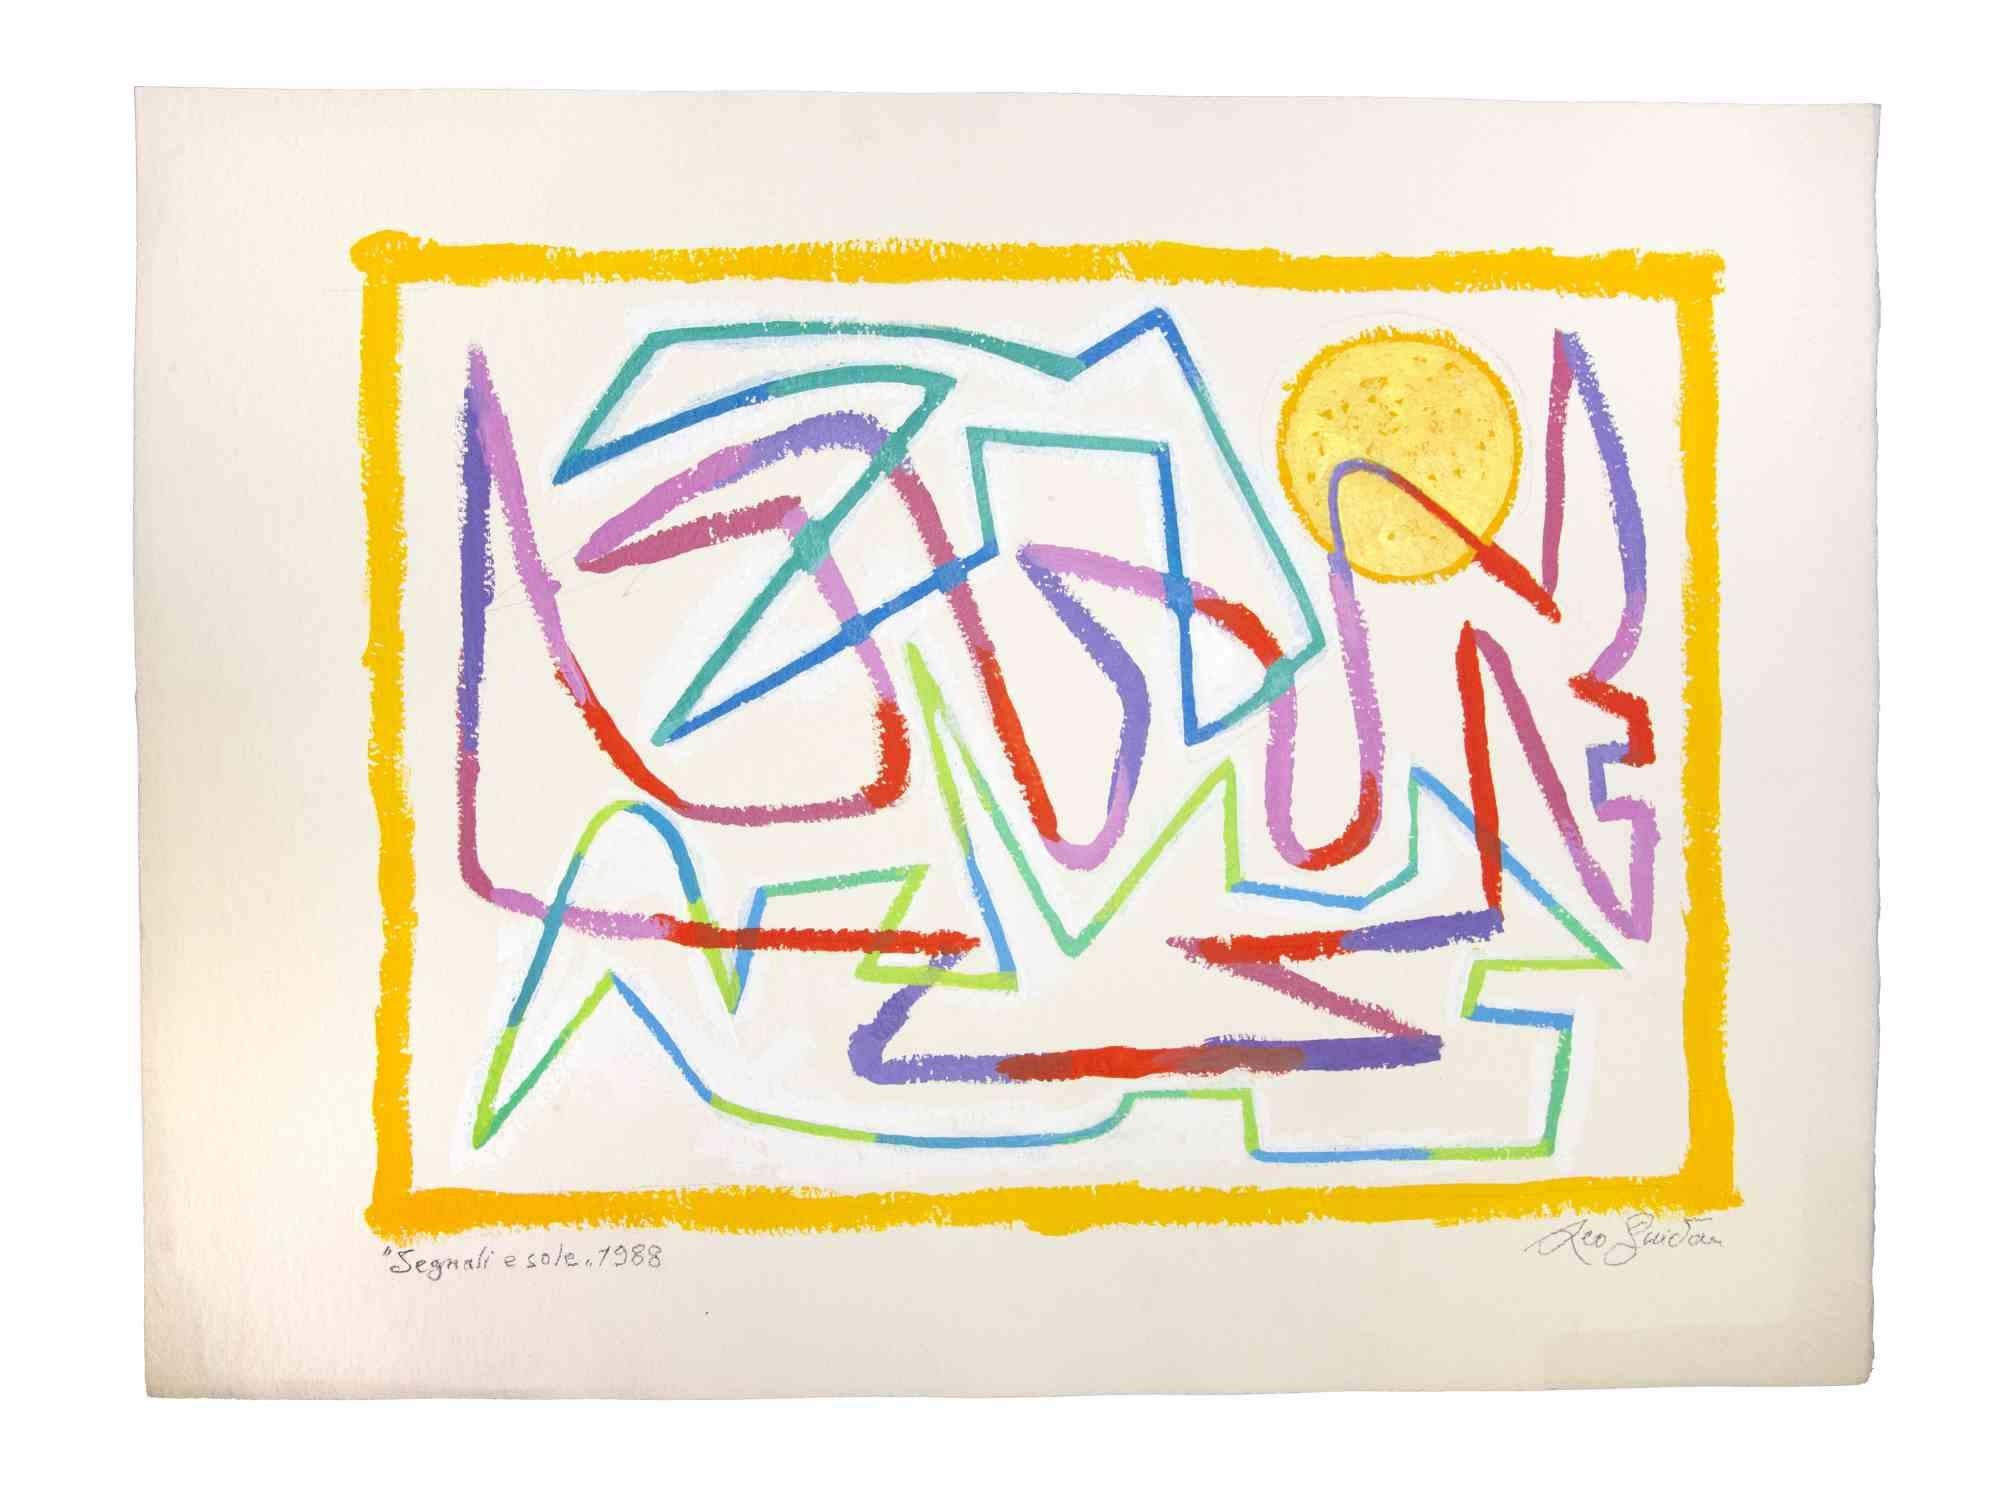 Segnali e sole is an original Contemporary artwork realized  in 1988  by the italian Contemporary artist  Leo Guida  (1992 - 2017).

Original drawing in beautiful colored tempera on ivory-colored cardboard.
 
Hand-signed and dated on the lower